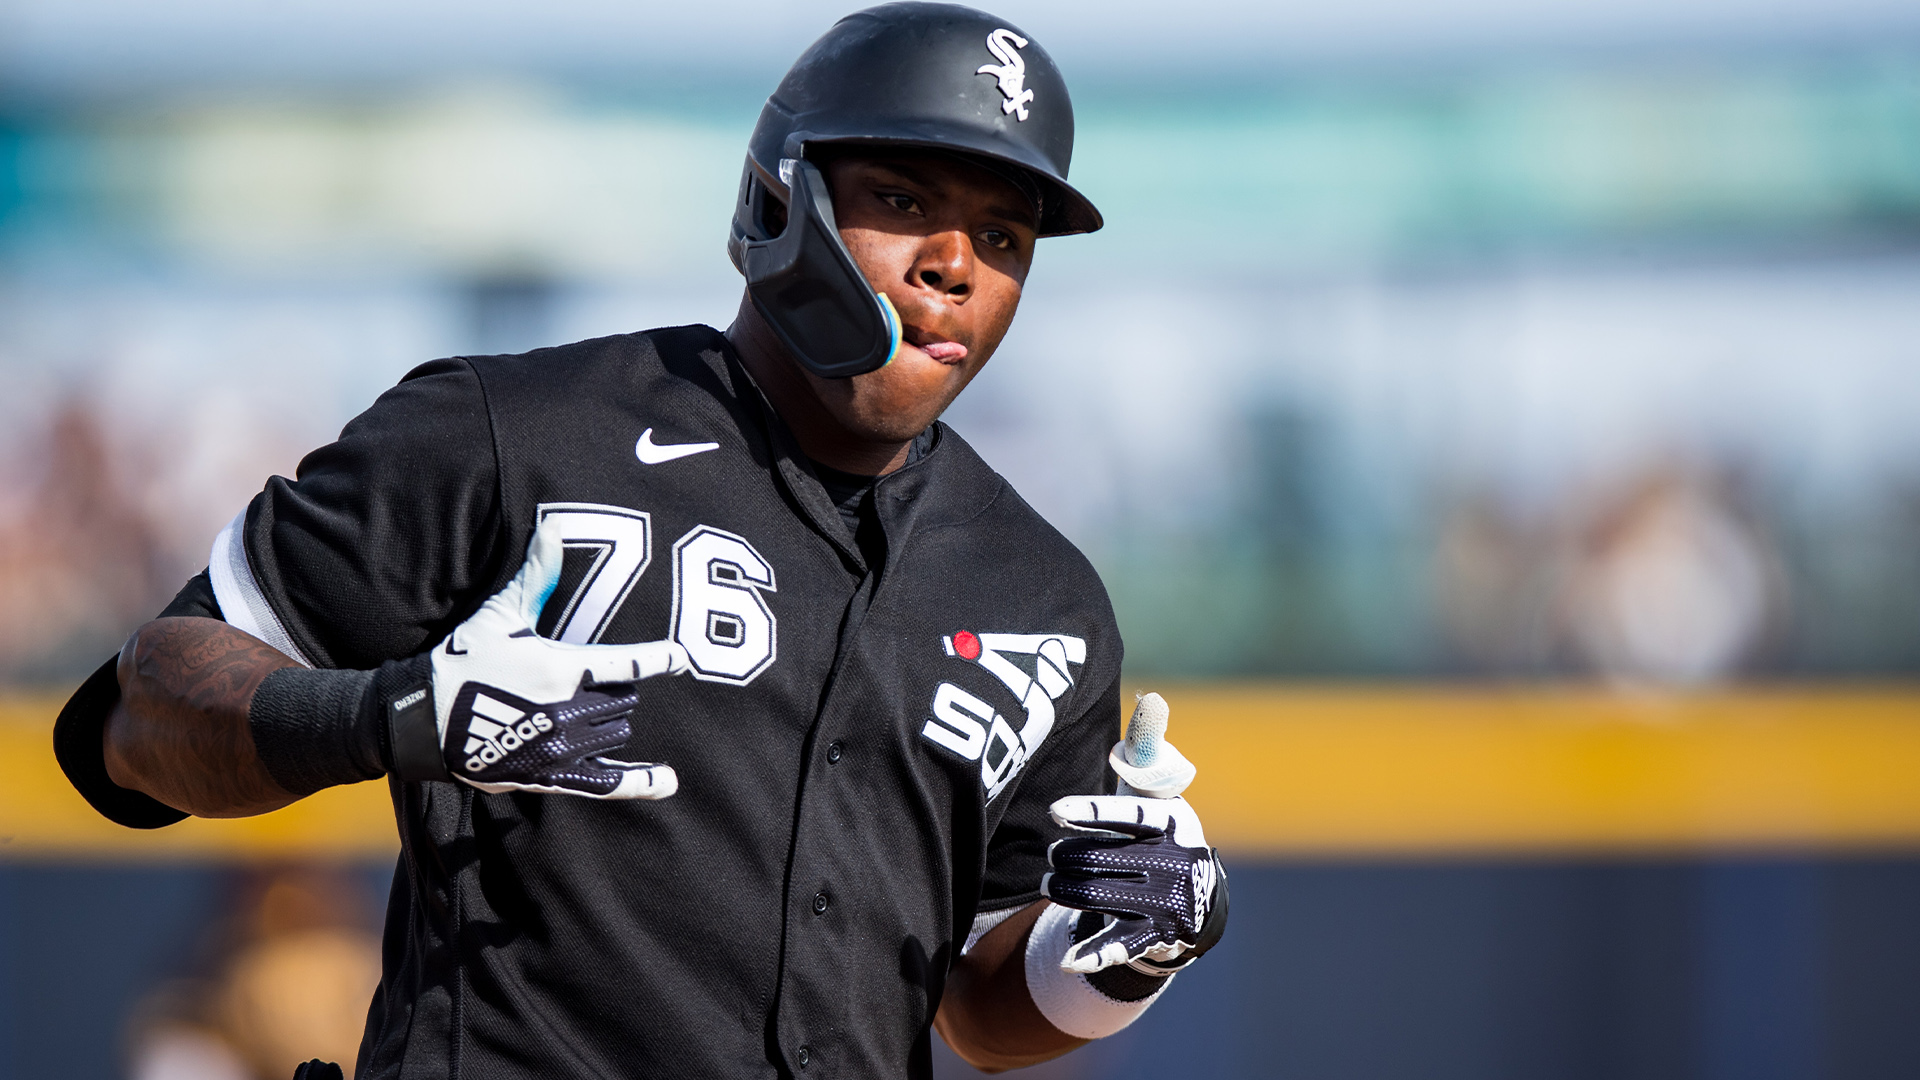 WATCH: Oscar Colas find out he made White Sox' Opening Day roster